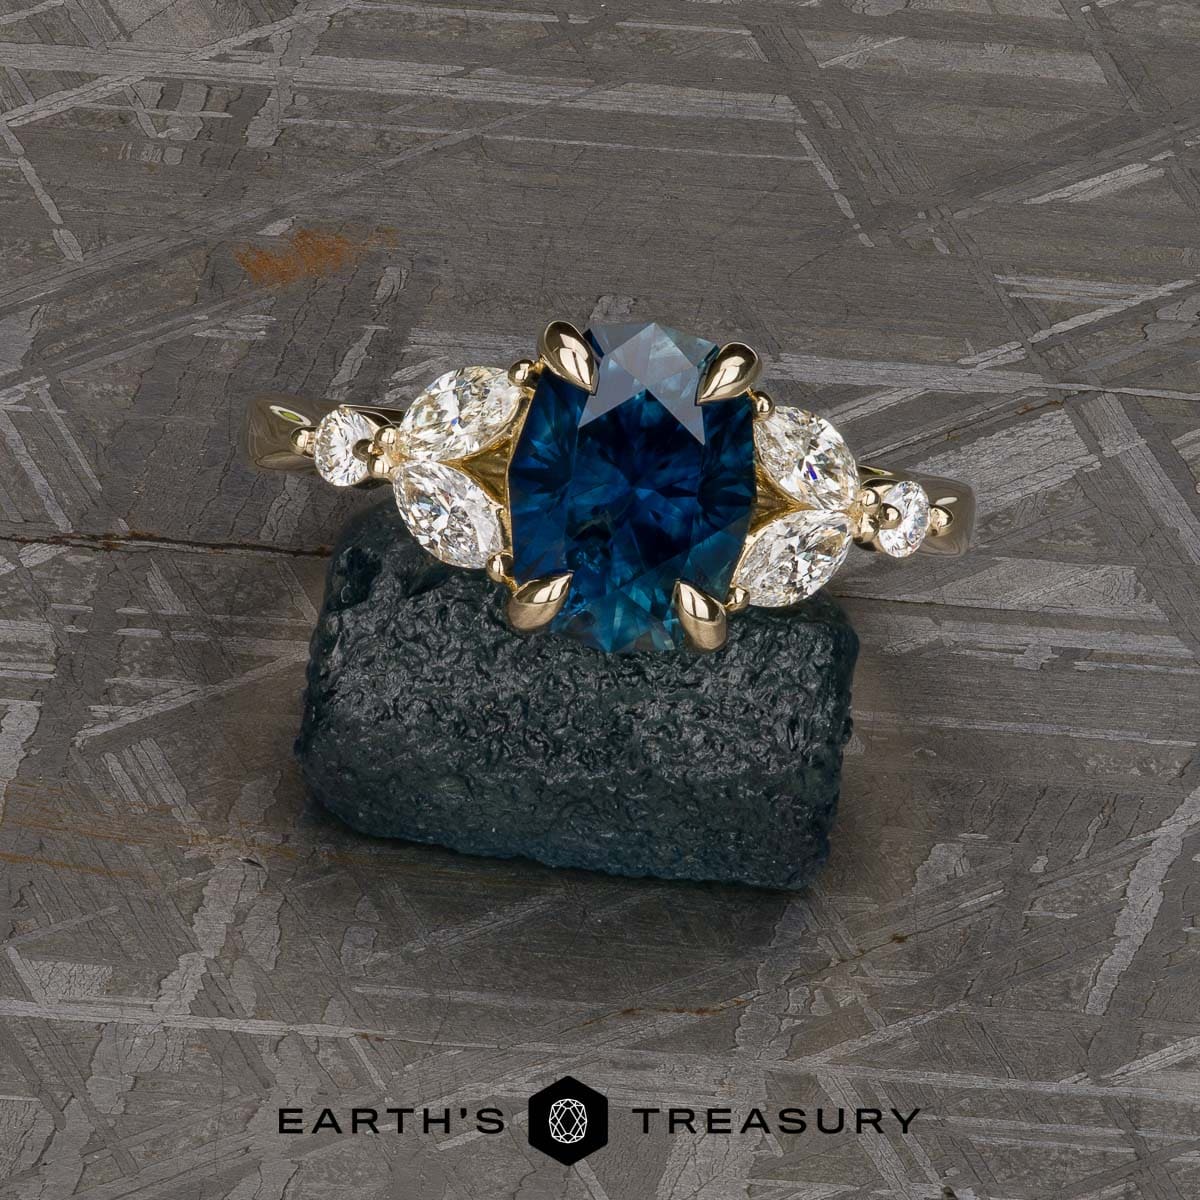 The “Cattleya” ring in 14k yellow gold with 2.26-carat Montana sapphire